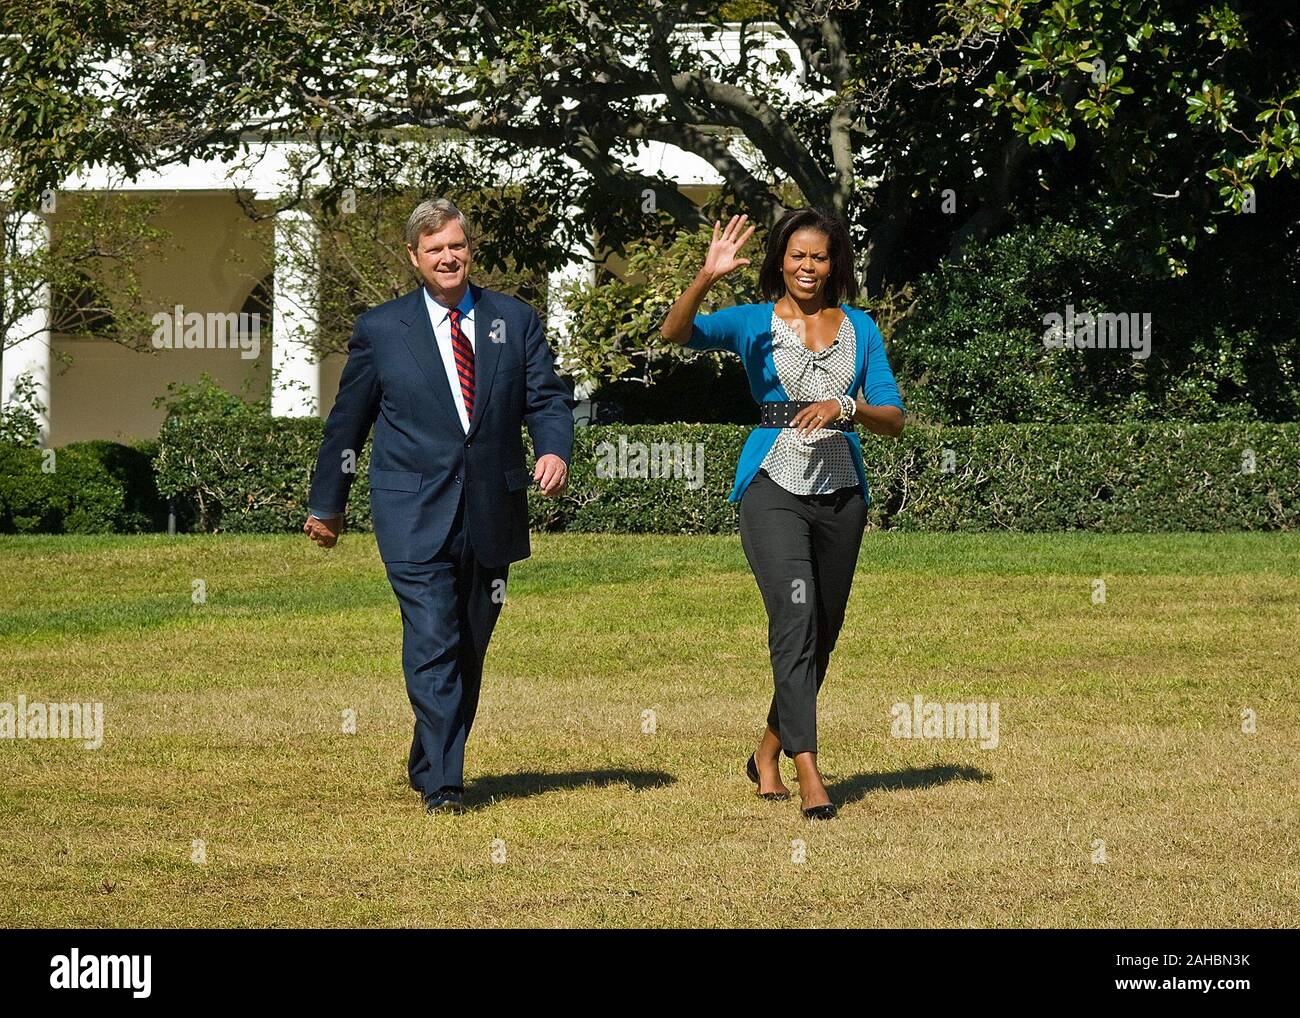 First Lady Michelle Obama and Agriculture Secretary Tom Vilsack stroll across the South lawn of the White House before announcing the Obama Administration is expanding the Healthier US School Challenge. Congress is currently considering the Childhood Nutrition Reauthorization legislation, which impacts the National School Lunch and Breakfast programs. Vilsack cited the importance of proposals to eliminate barriers that impact the health and nutrition of our children. Stock Photo